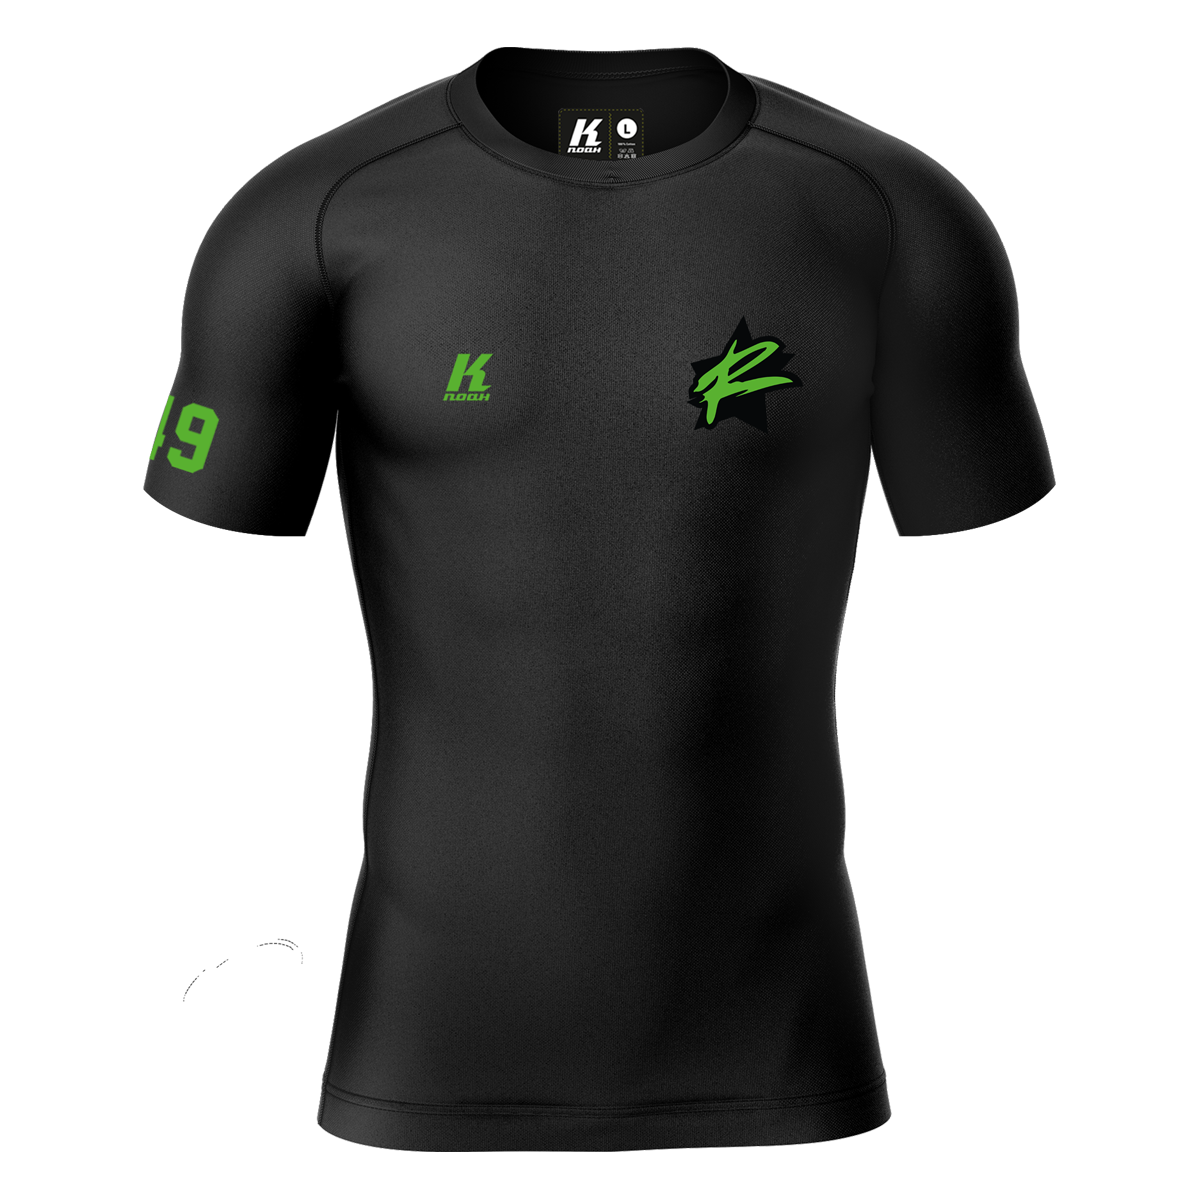 Rebels K.Tech Compression Shortsleeve Shirt black with Playernumber/Initials